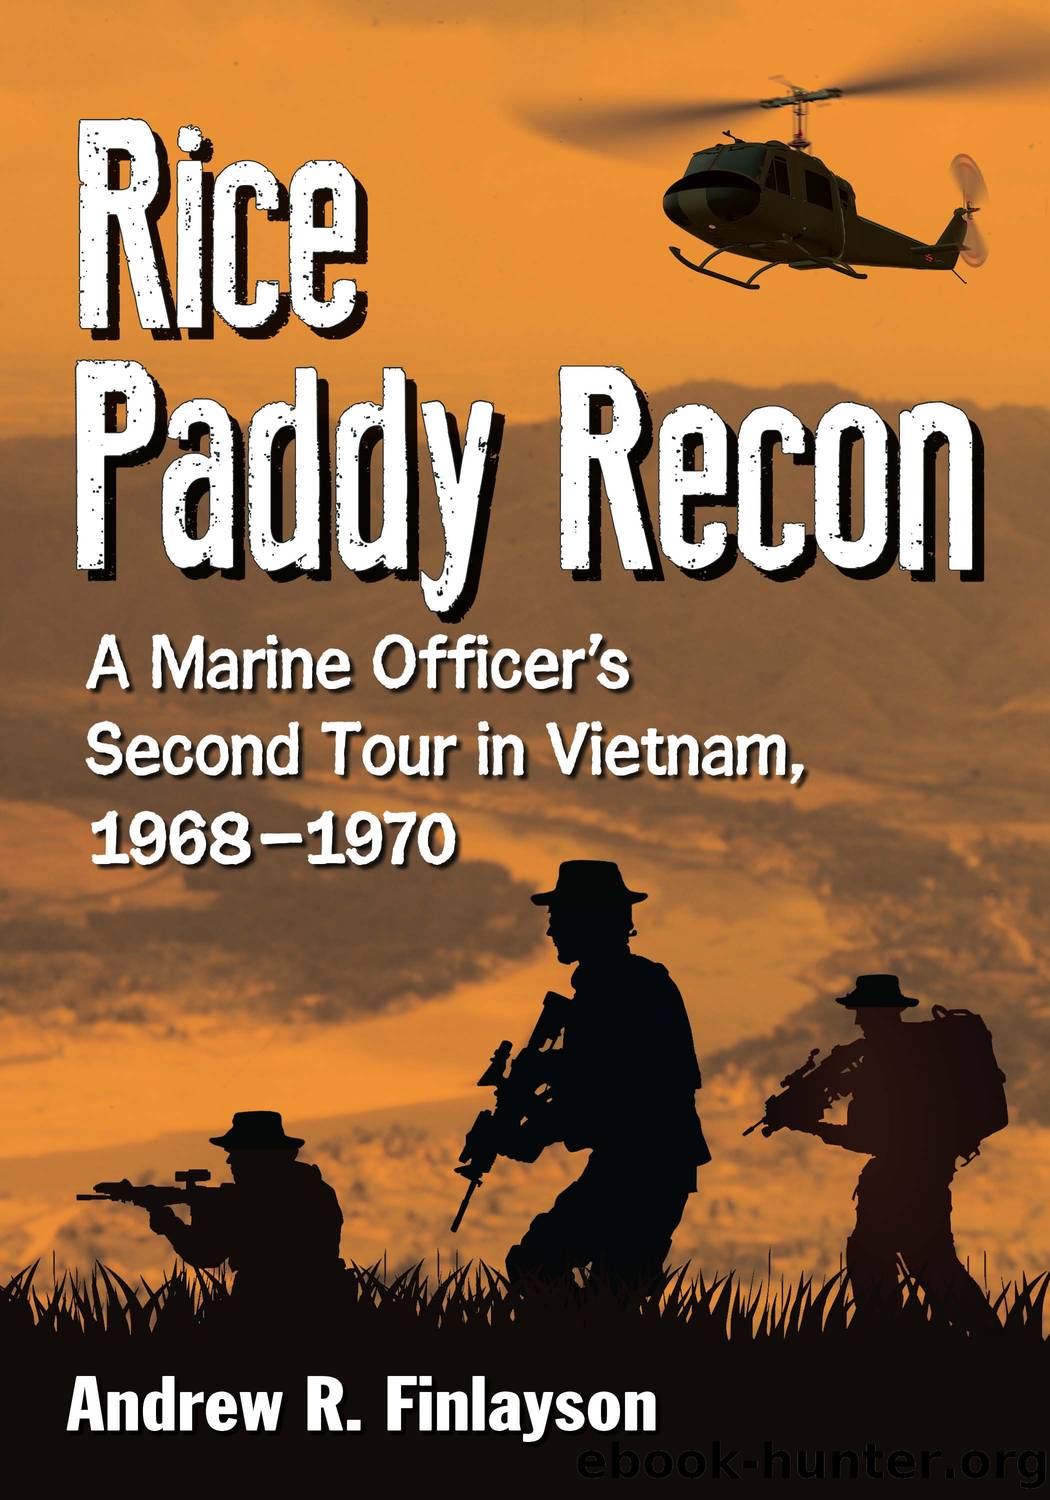 Rice Paddy Recon by Andrew R. Finlayson